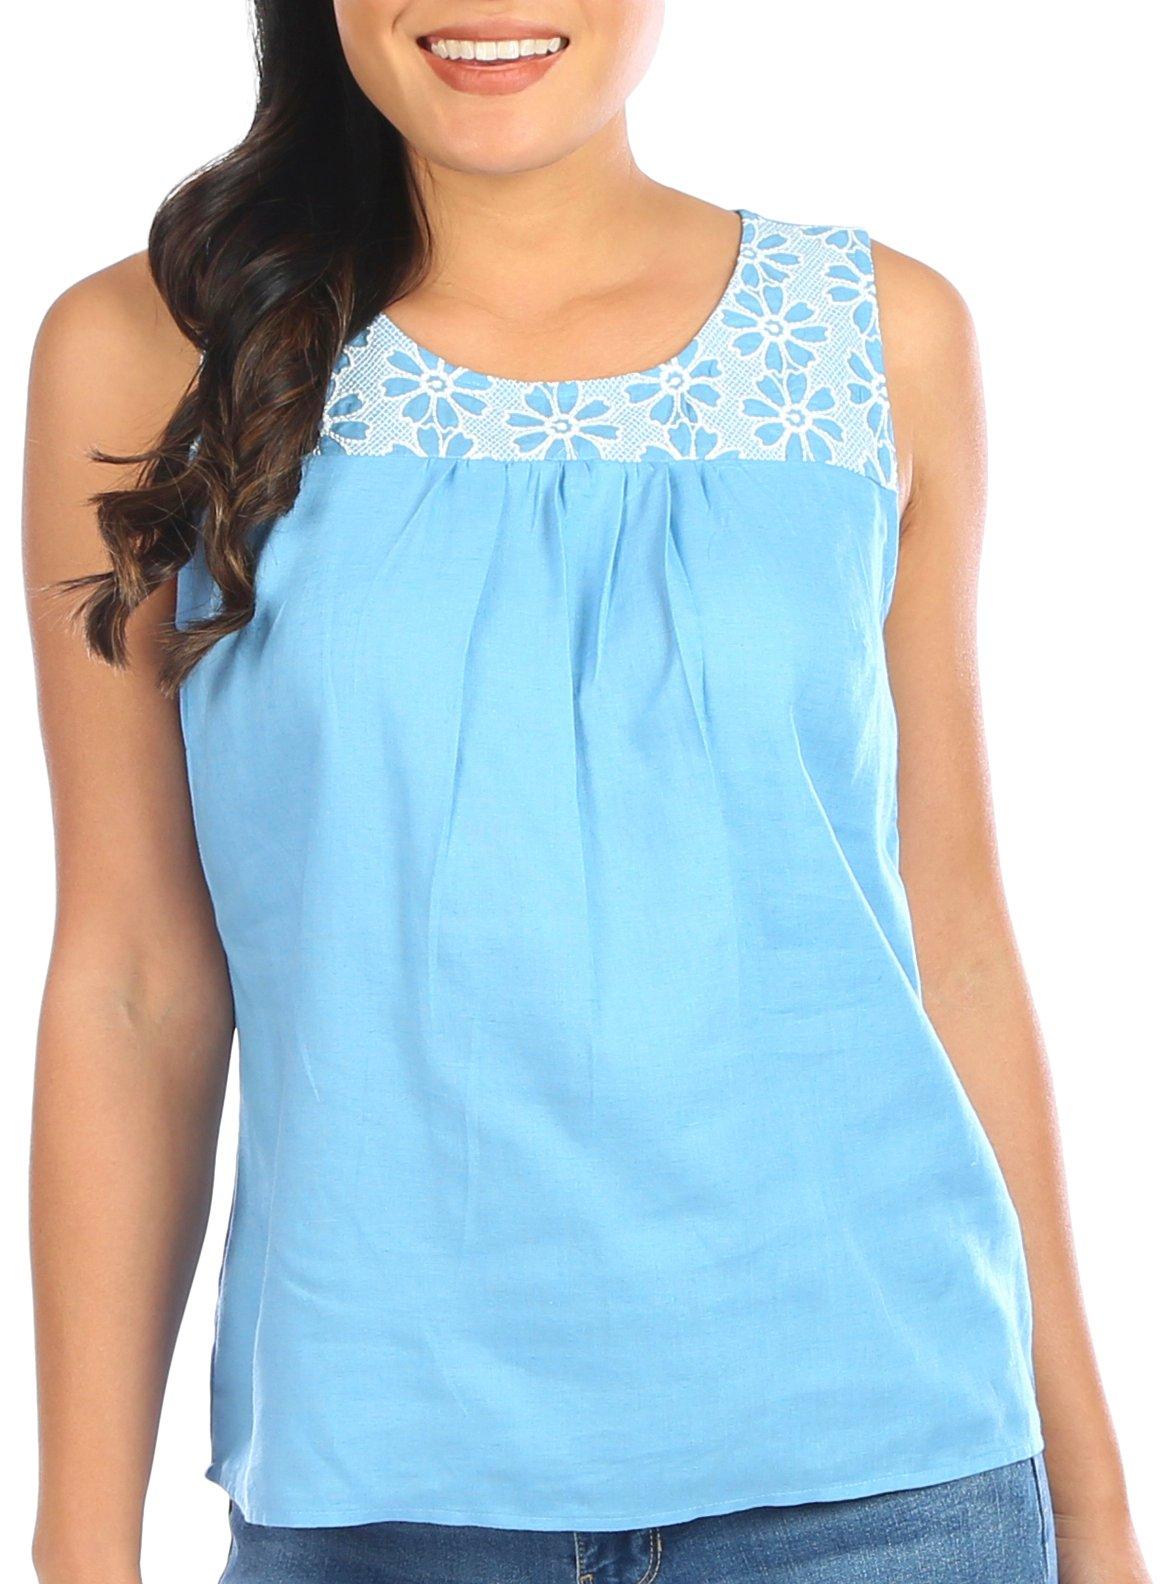 Coral Bay Womens Embellished Lace Sleeveless Top